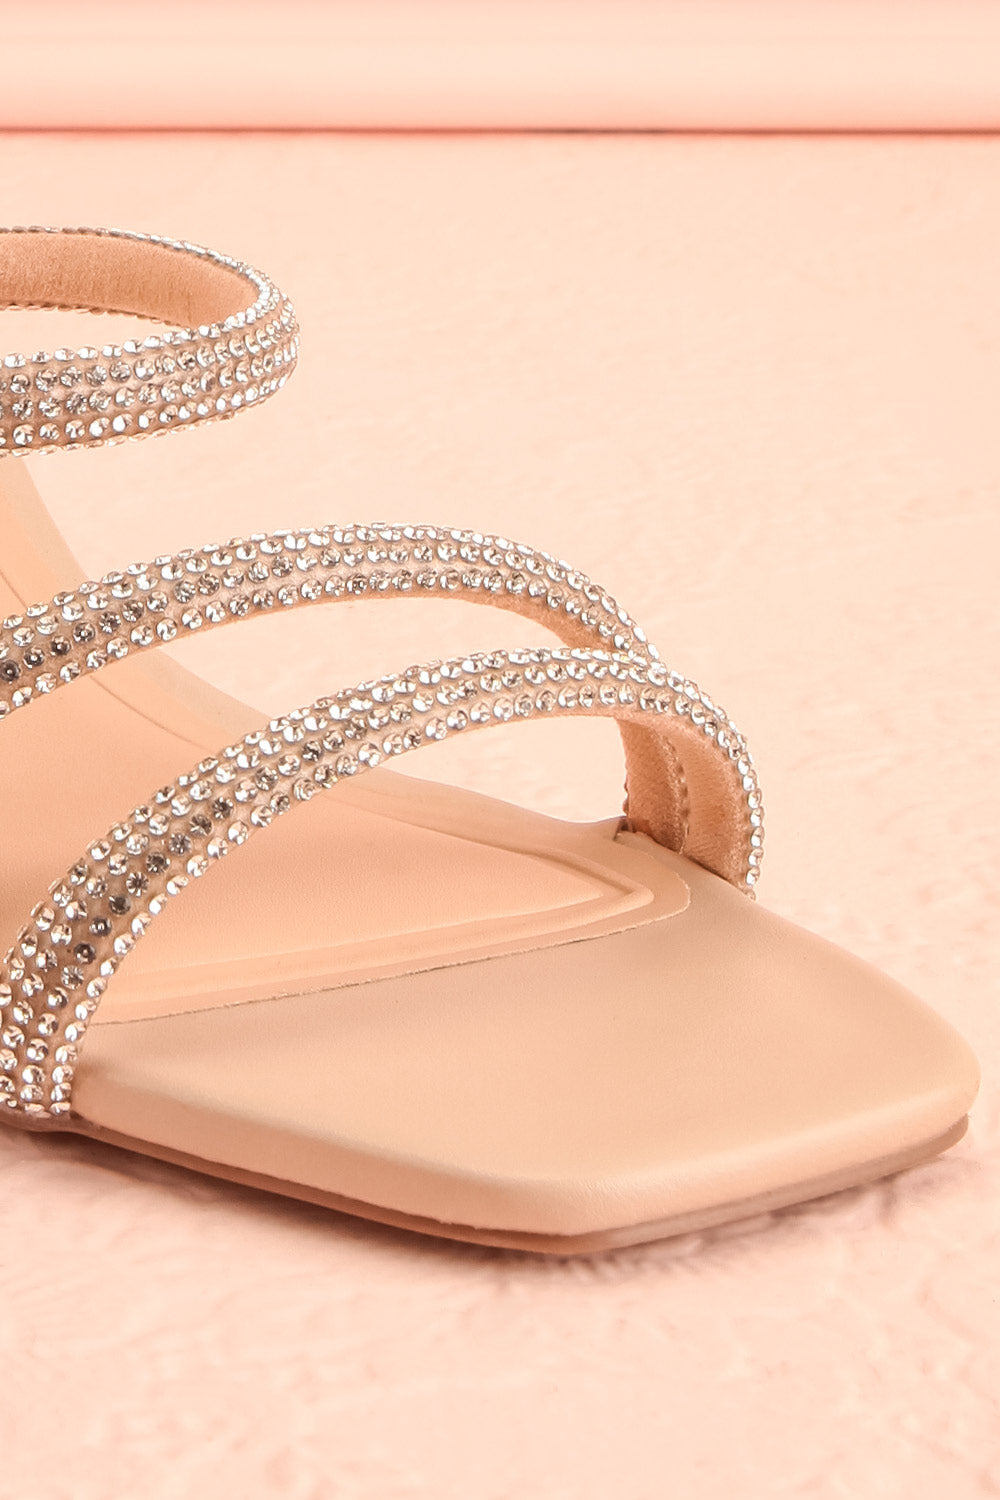 Zephra Beige Strappy Sandals w/ Crystals | Boutique 1861 front close-up